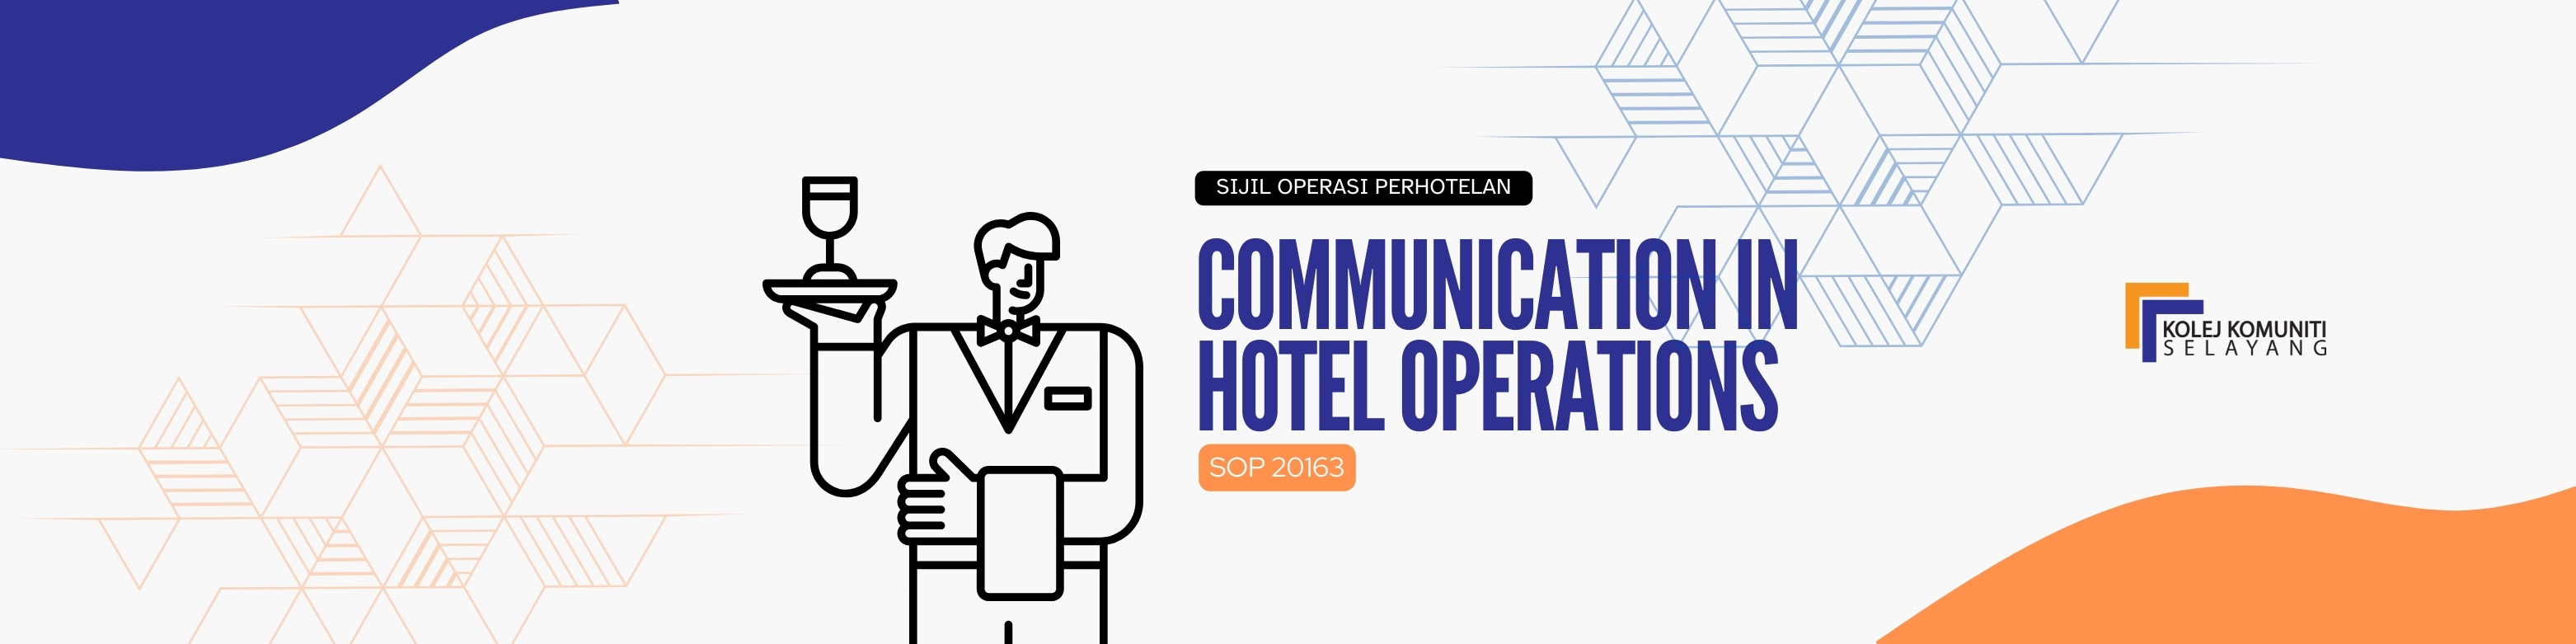 SOP20163 - COMMUNICATION IN HOTEL OPERATIONS